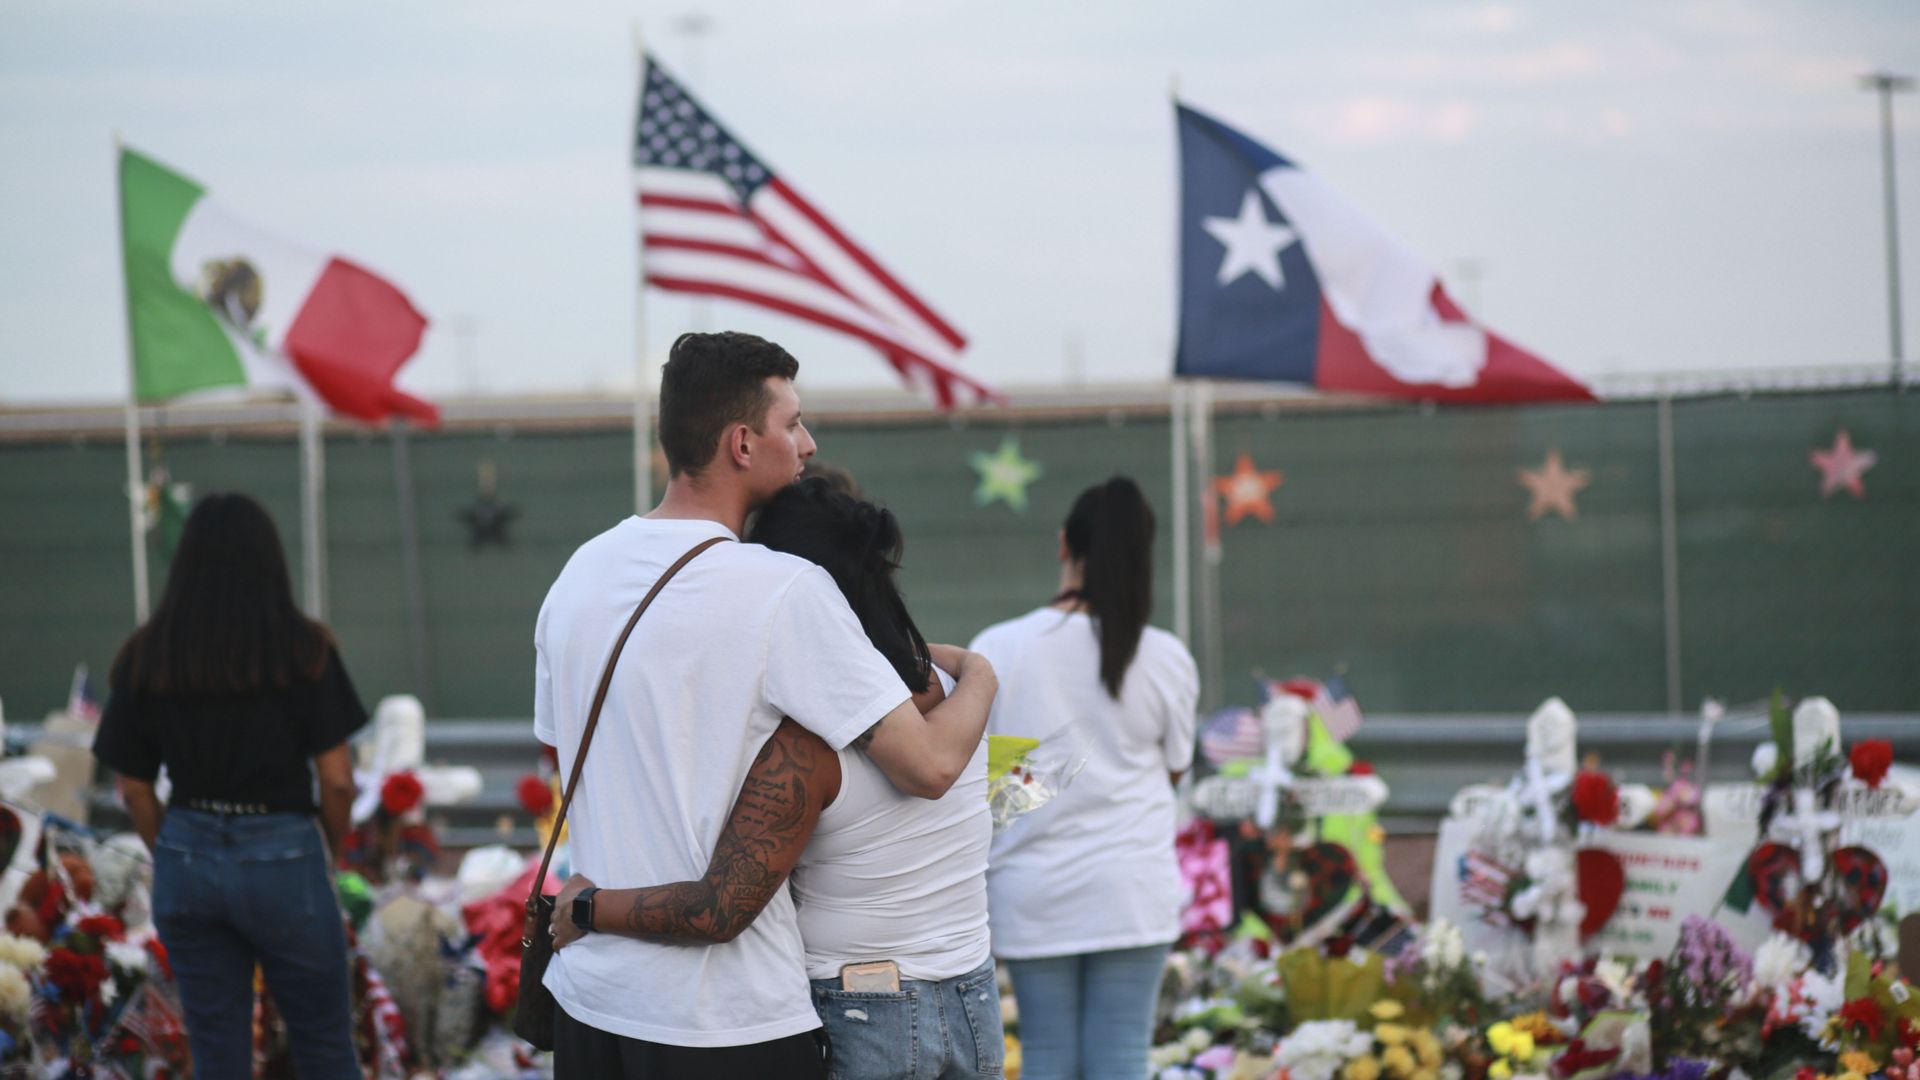 El Paso Mourns Victims Of Mass Shooting That Killed 22 And Wounded Dozens